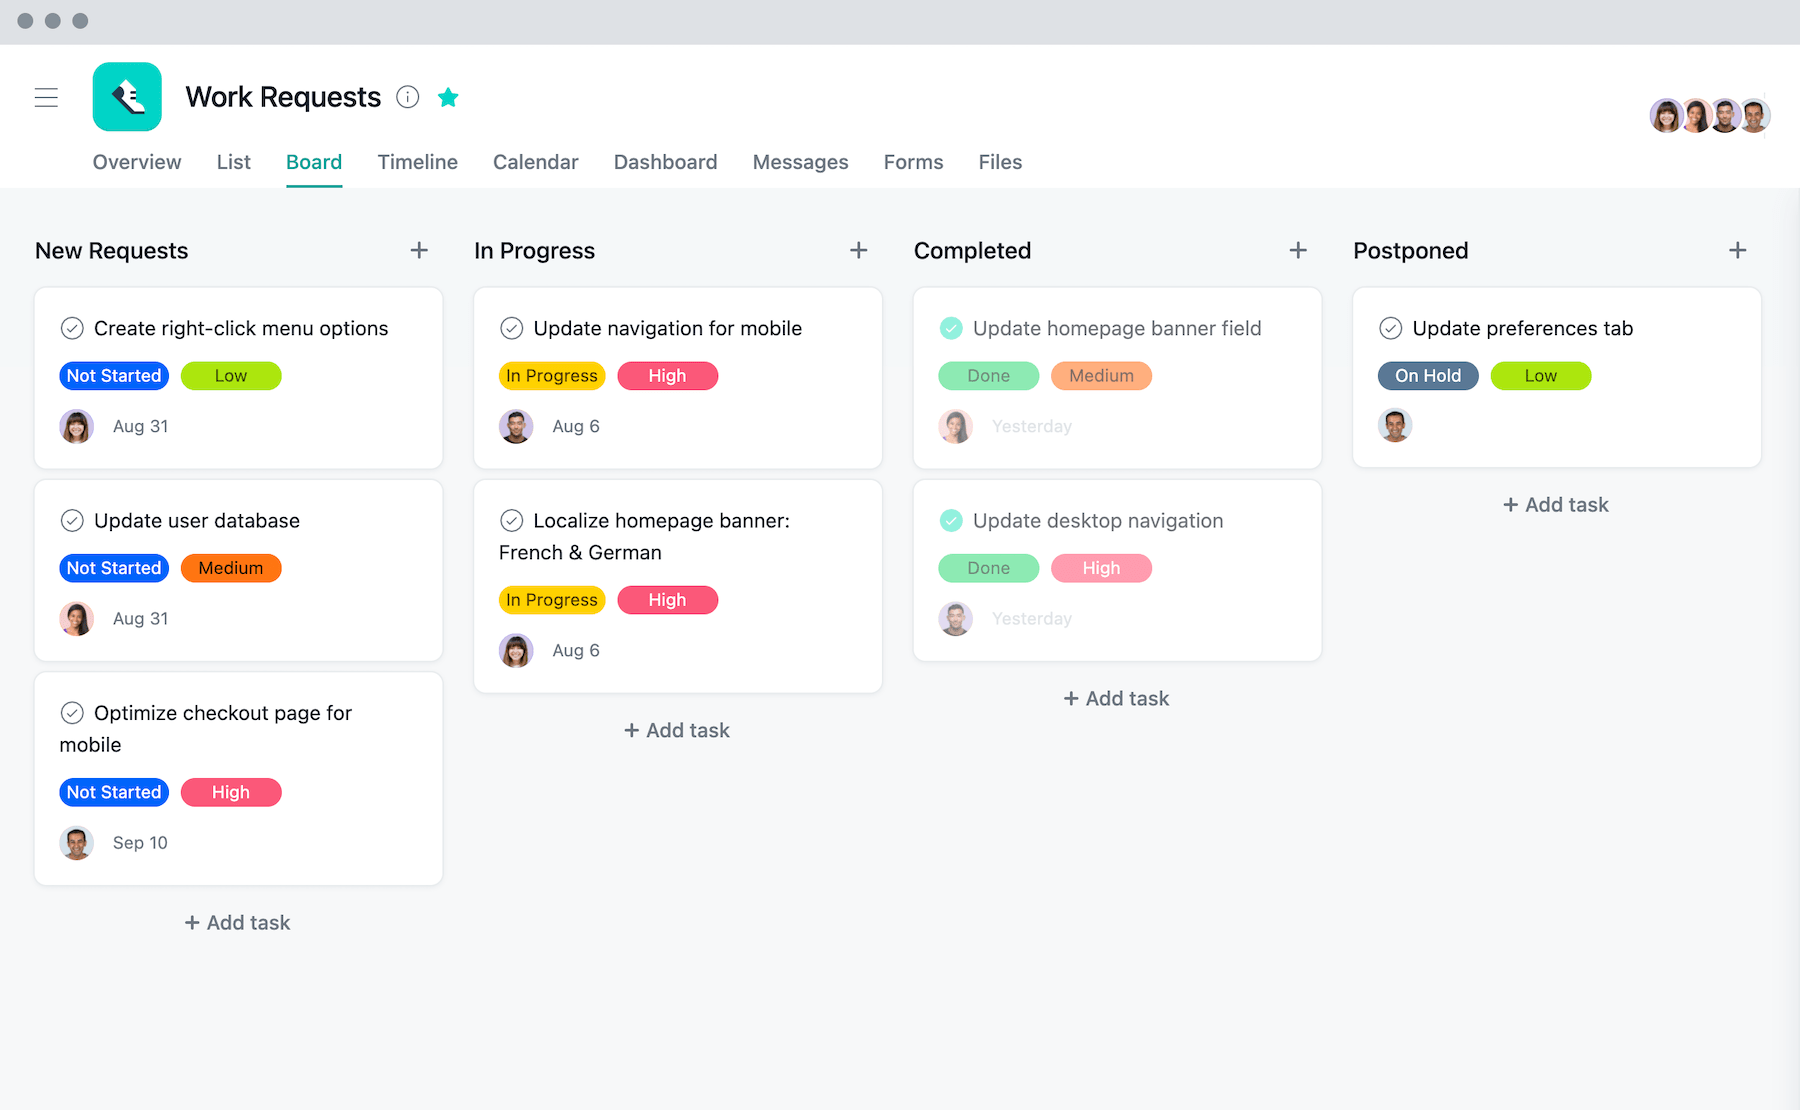 [Product UI] Work requests Kanban board example (Boards)